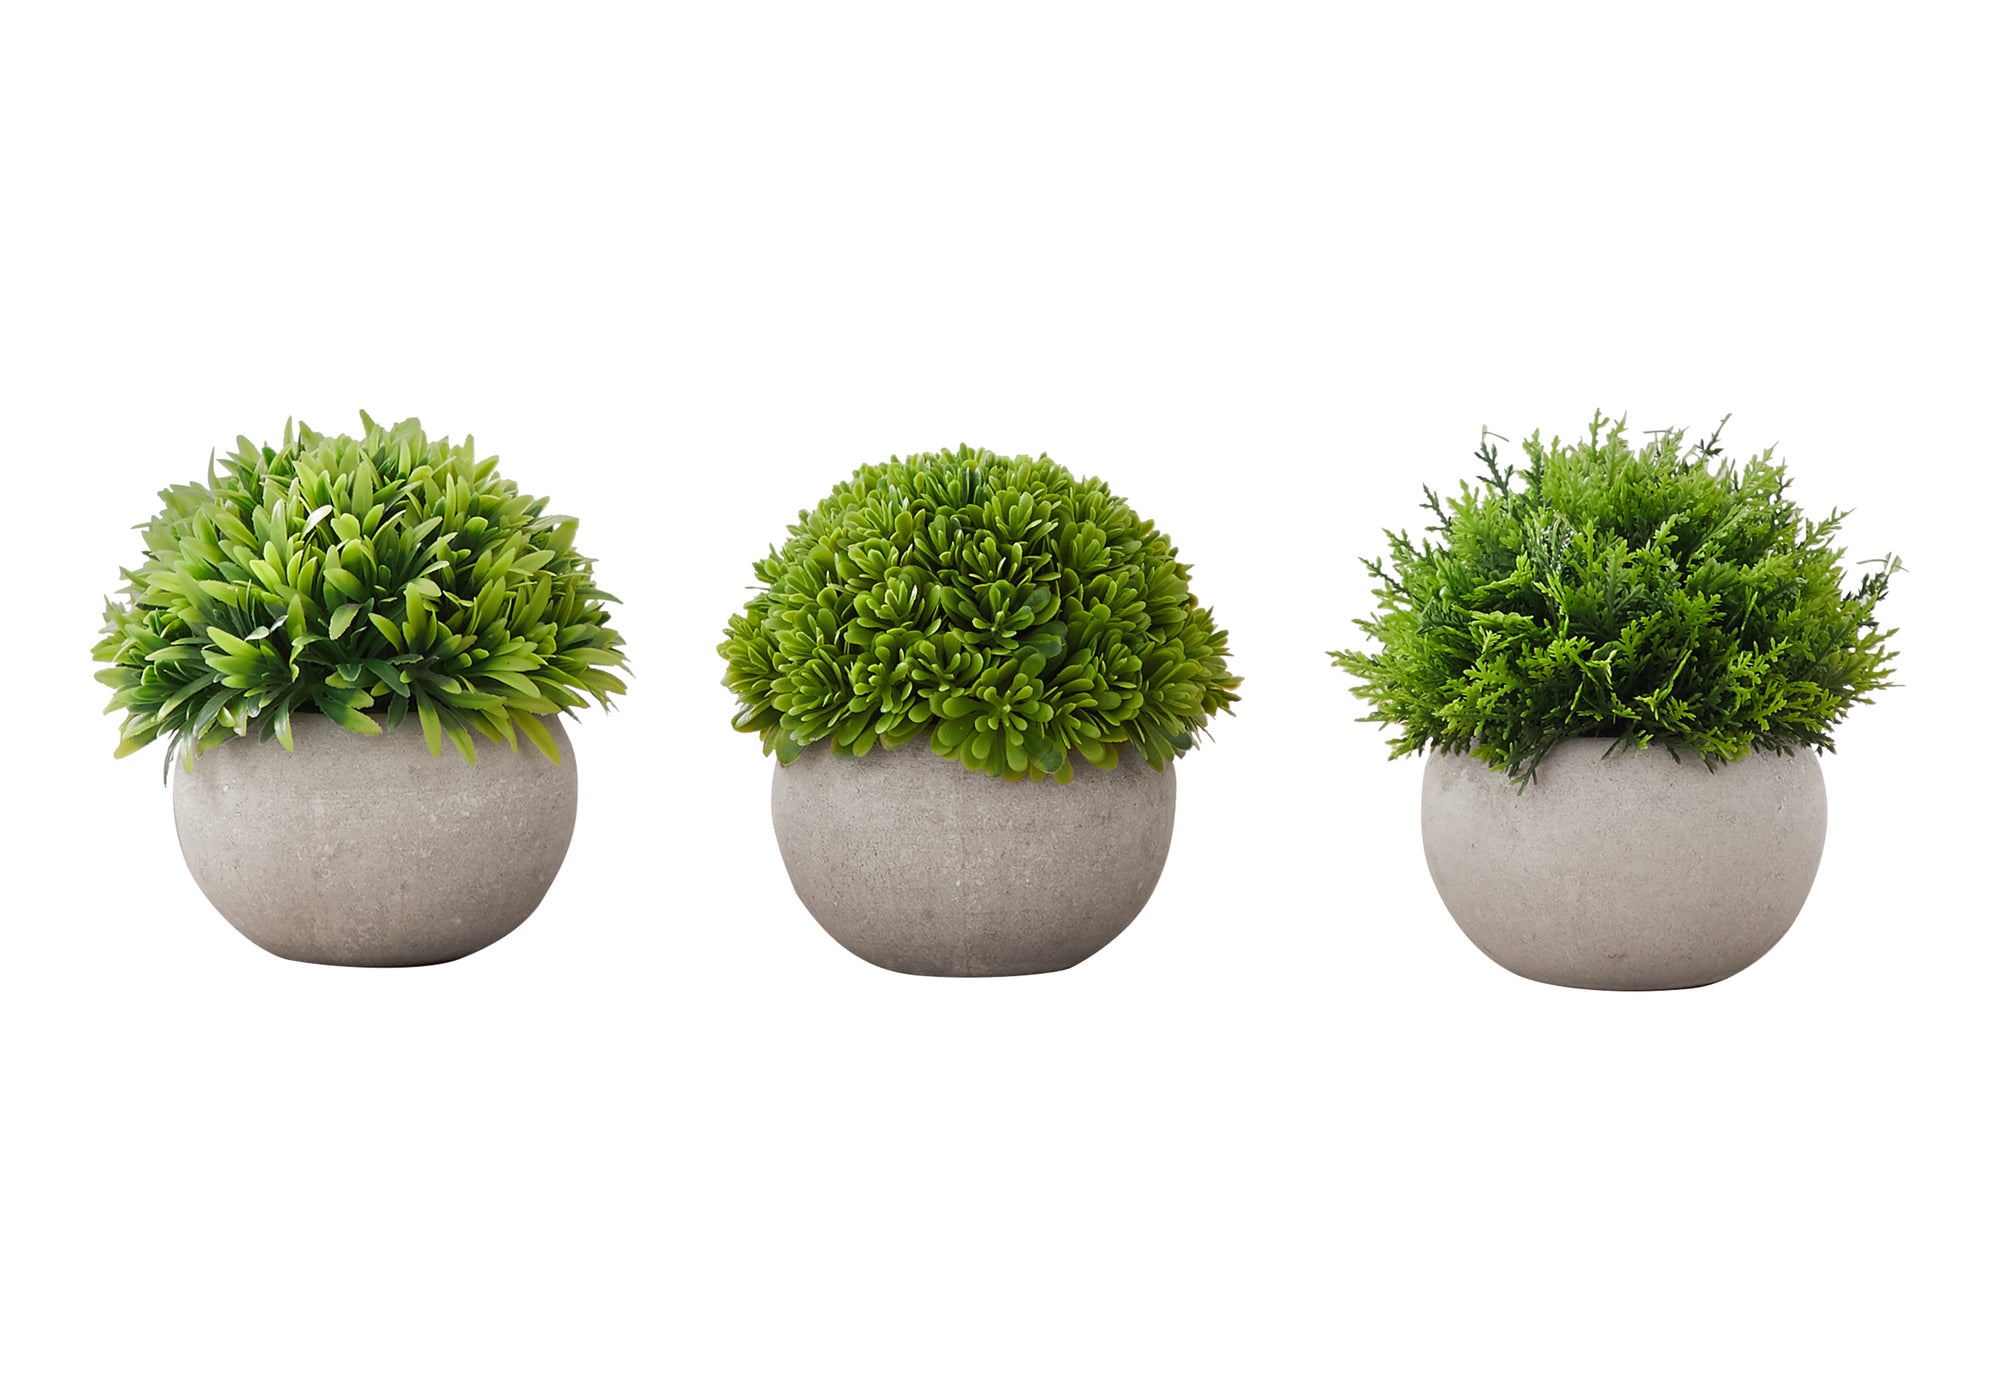 MN-799589    Artificial Plant, 5" Tall, Grass, Indoor, Faux, Fake, Table, Greenery, Potted, Set Of 3, Decorative, Green Plants, Grey Pots